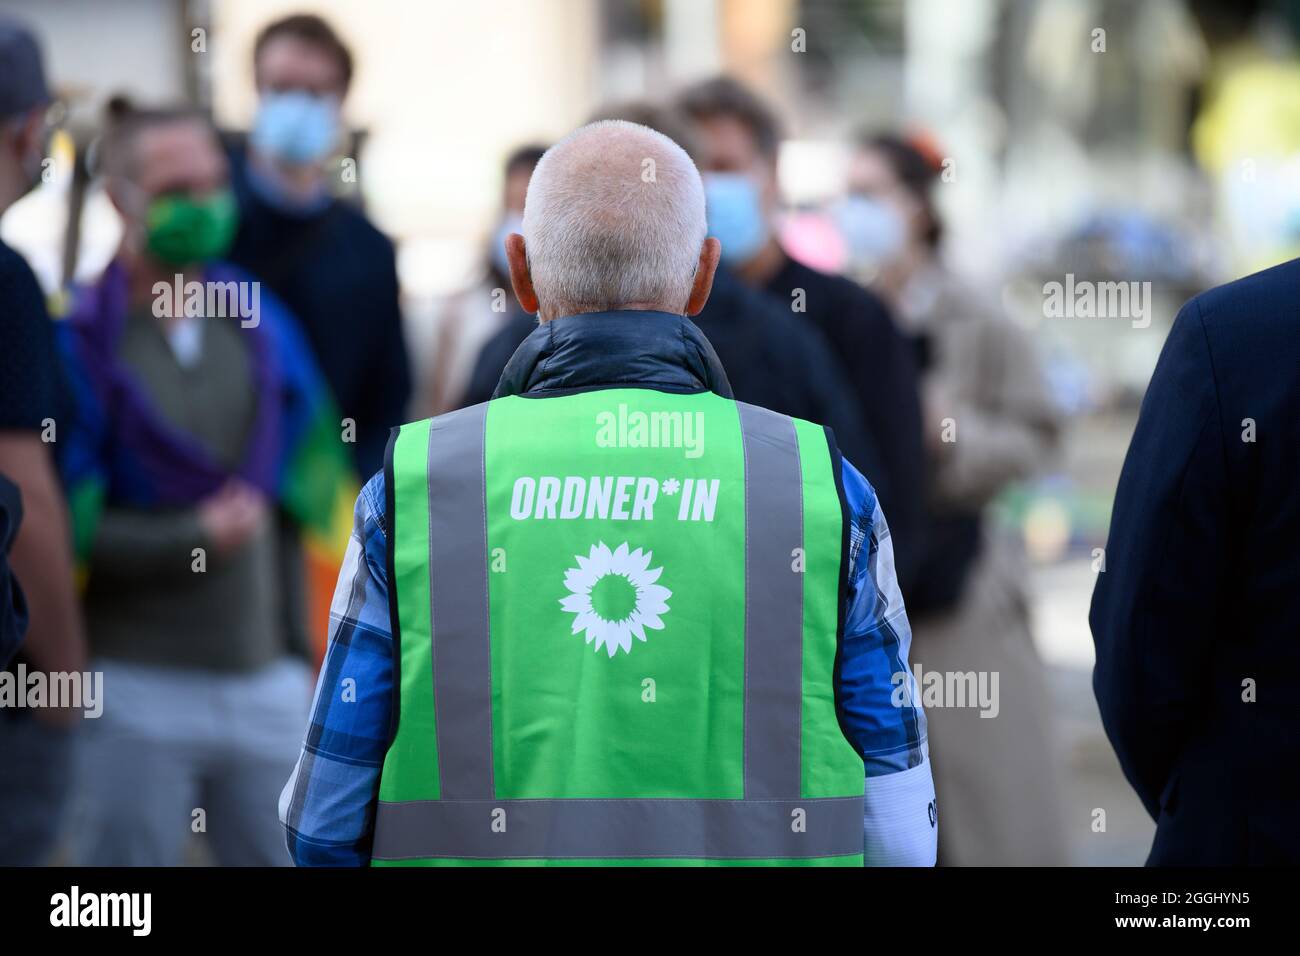 Cottbus, Germany. 01st Sep, 2021. A helper at the election campaign event  of Bündnis 90/Die Grünen on Oberkirchplatz wears a green high-visibility  vest with the gender-appropriate inscription "Ordner*in" ("Steward") during  the event.